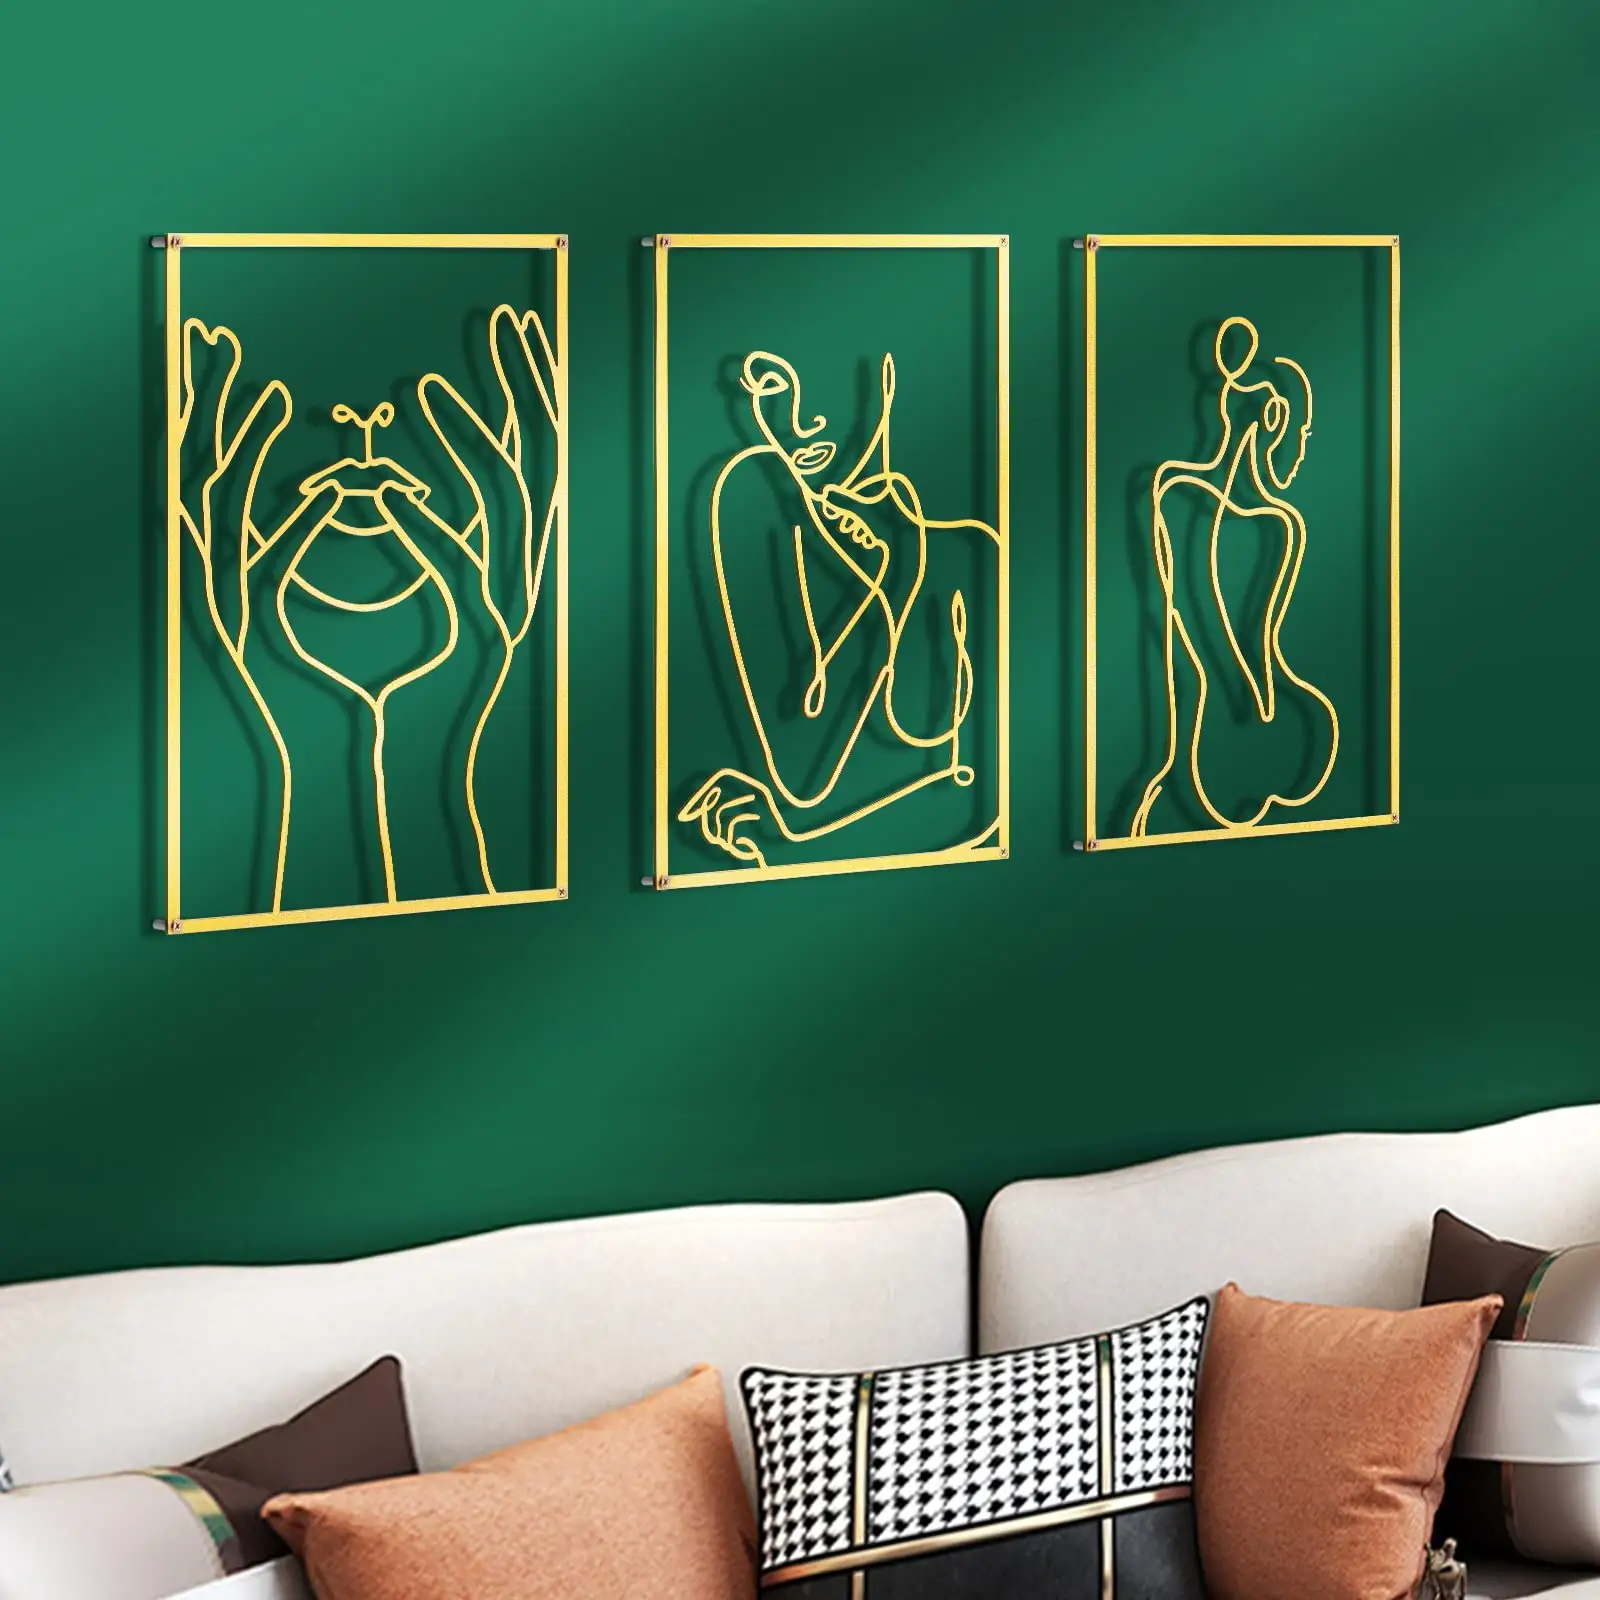 Wall Decor Large Interior Bedroom Living Room Abstract Hanging Metal Modern Gold Luxury Body Art Decorative Home Wall Decor